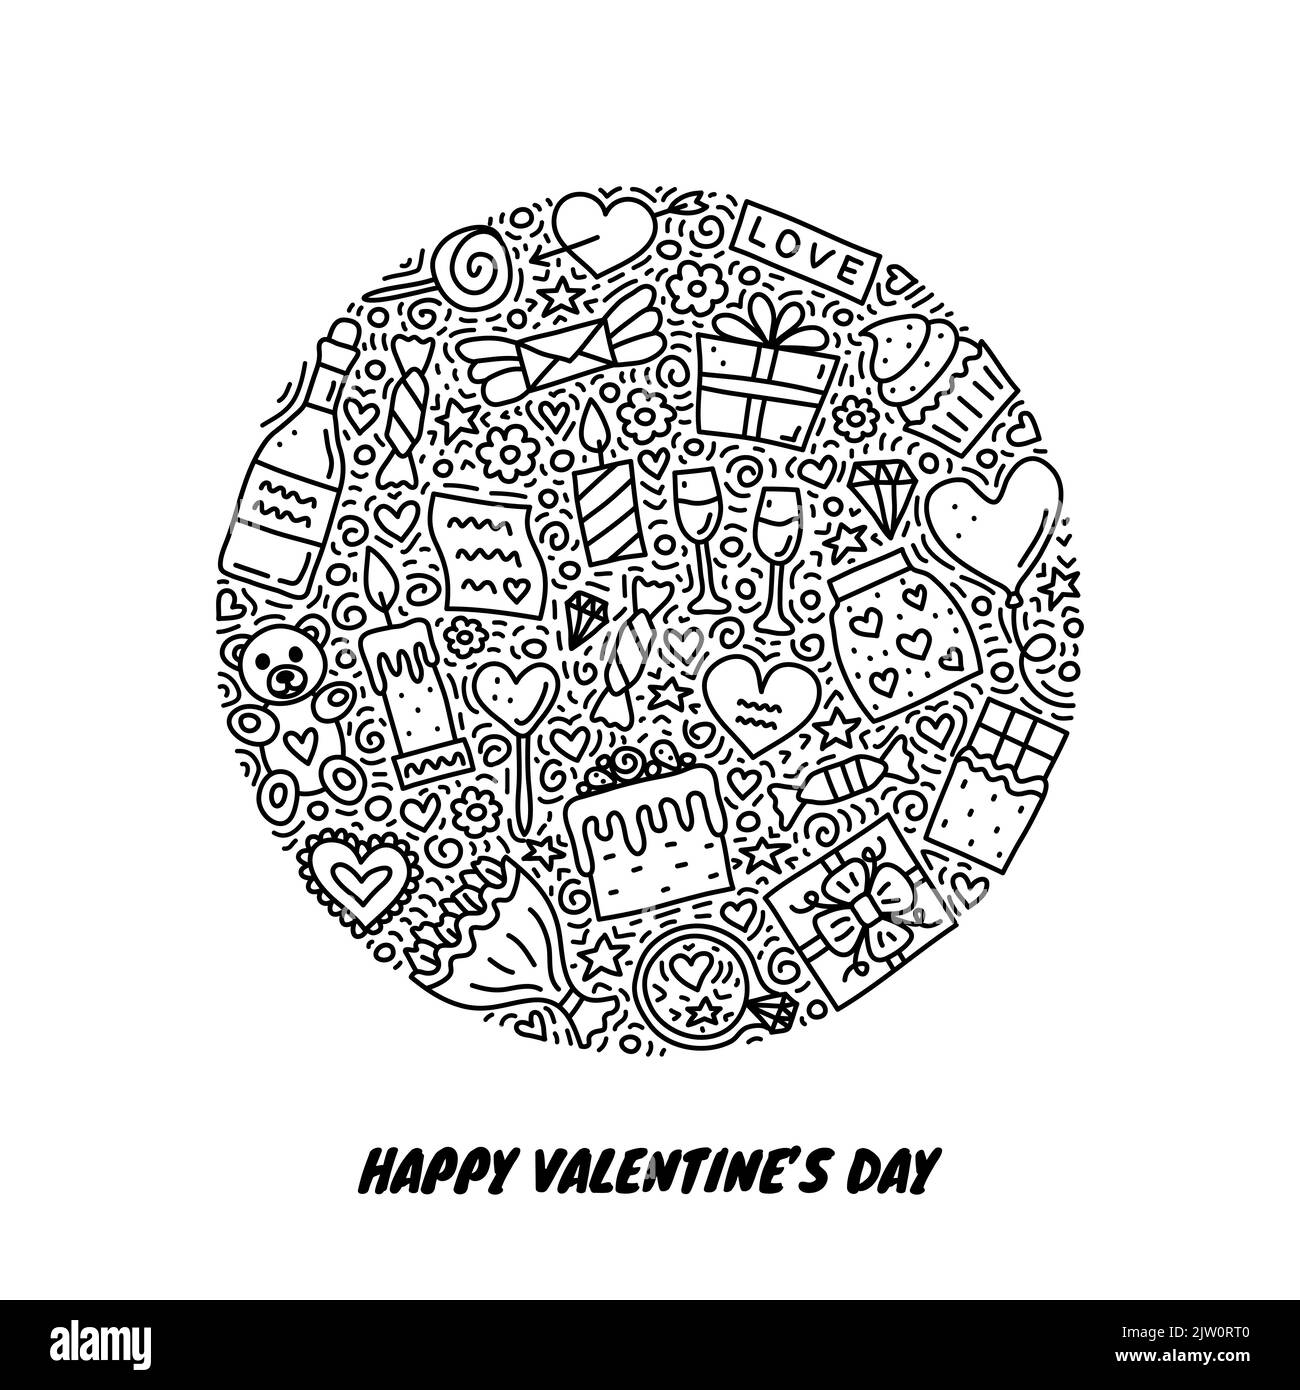 Outline doodle Valentine s day icons composed in circle shape. Stock Vector